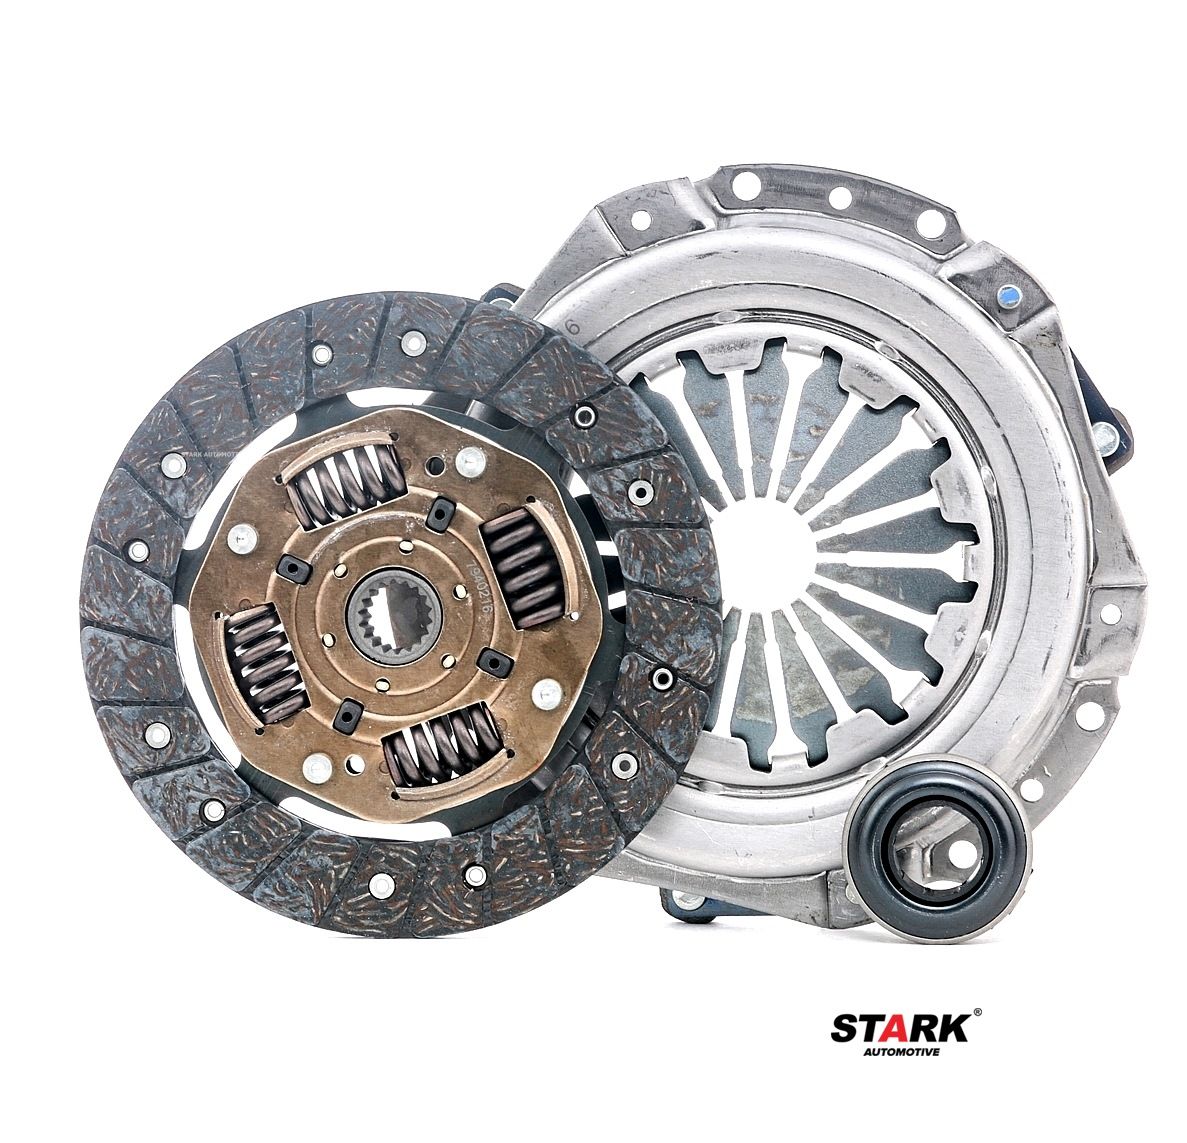 STARK SKCK-0100060 Clutch kit three-piece, with clutch pressure plate, with clutch disc, with bearing(s), 180mm